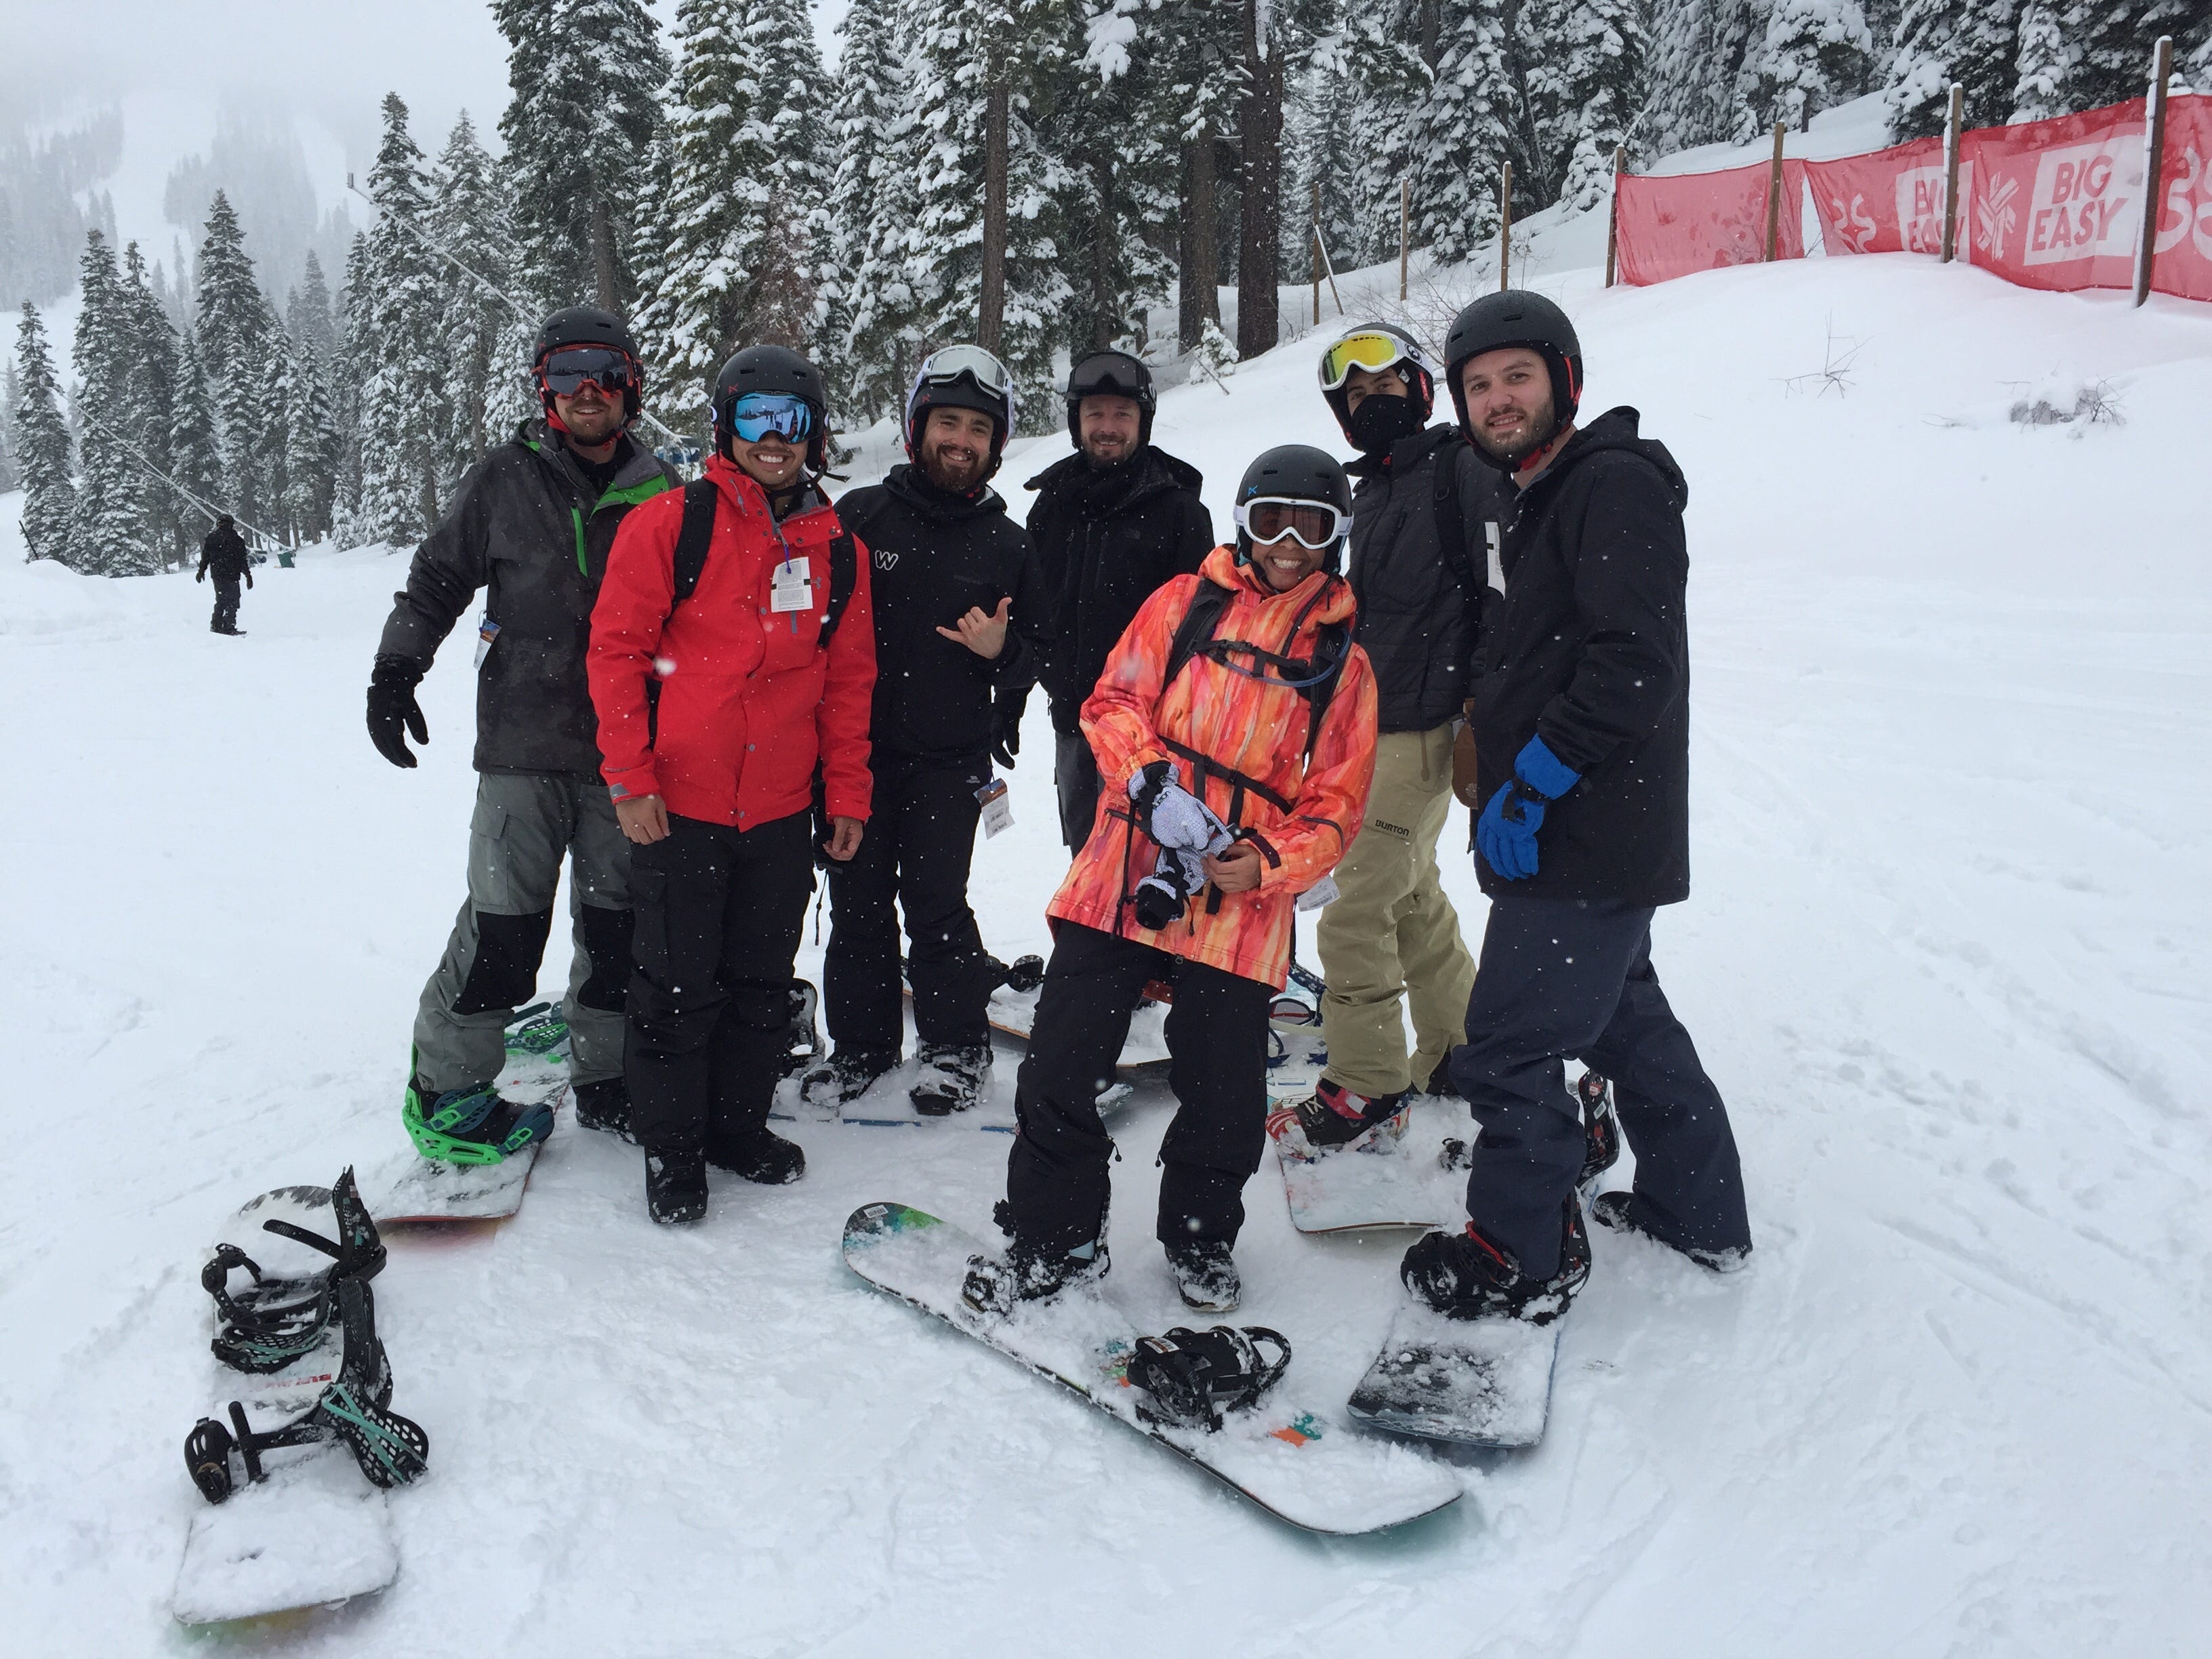 5 Career Insights from Learning to Snowboard | by Ray Sensenbach | Medium